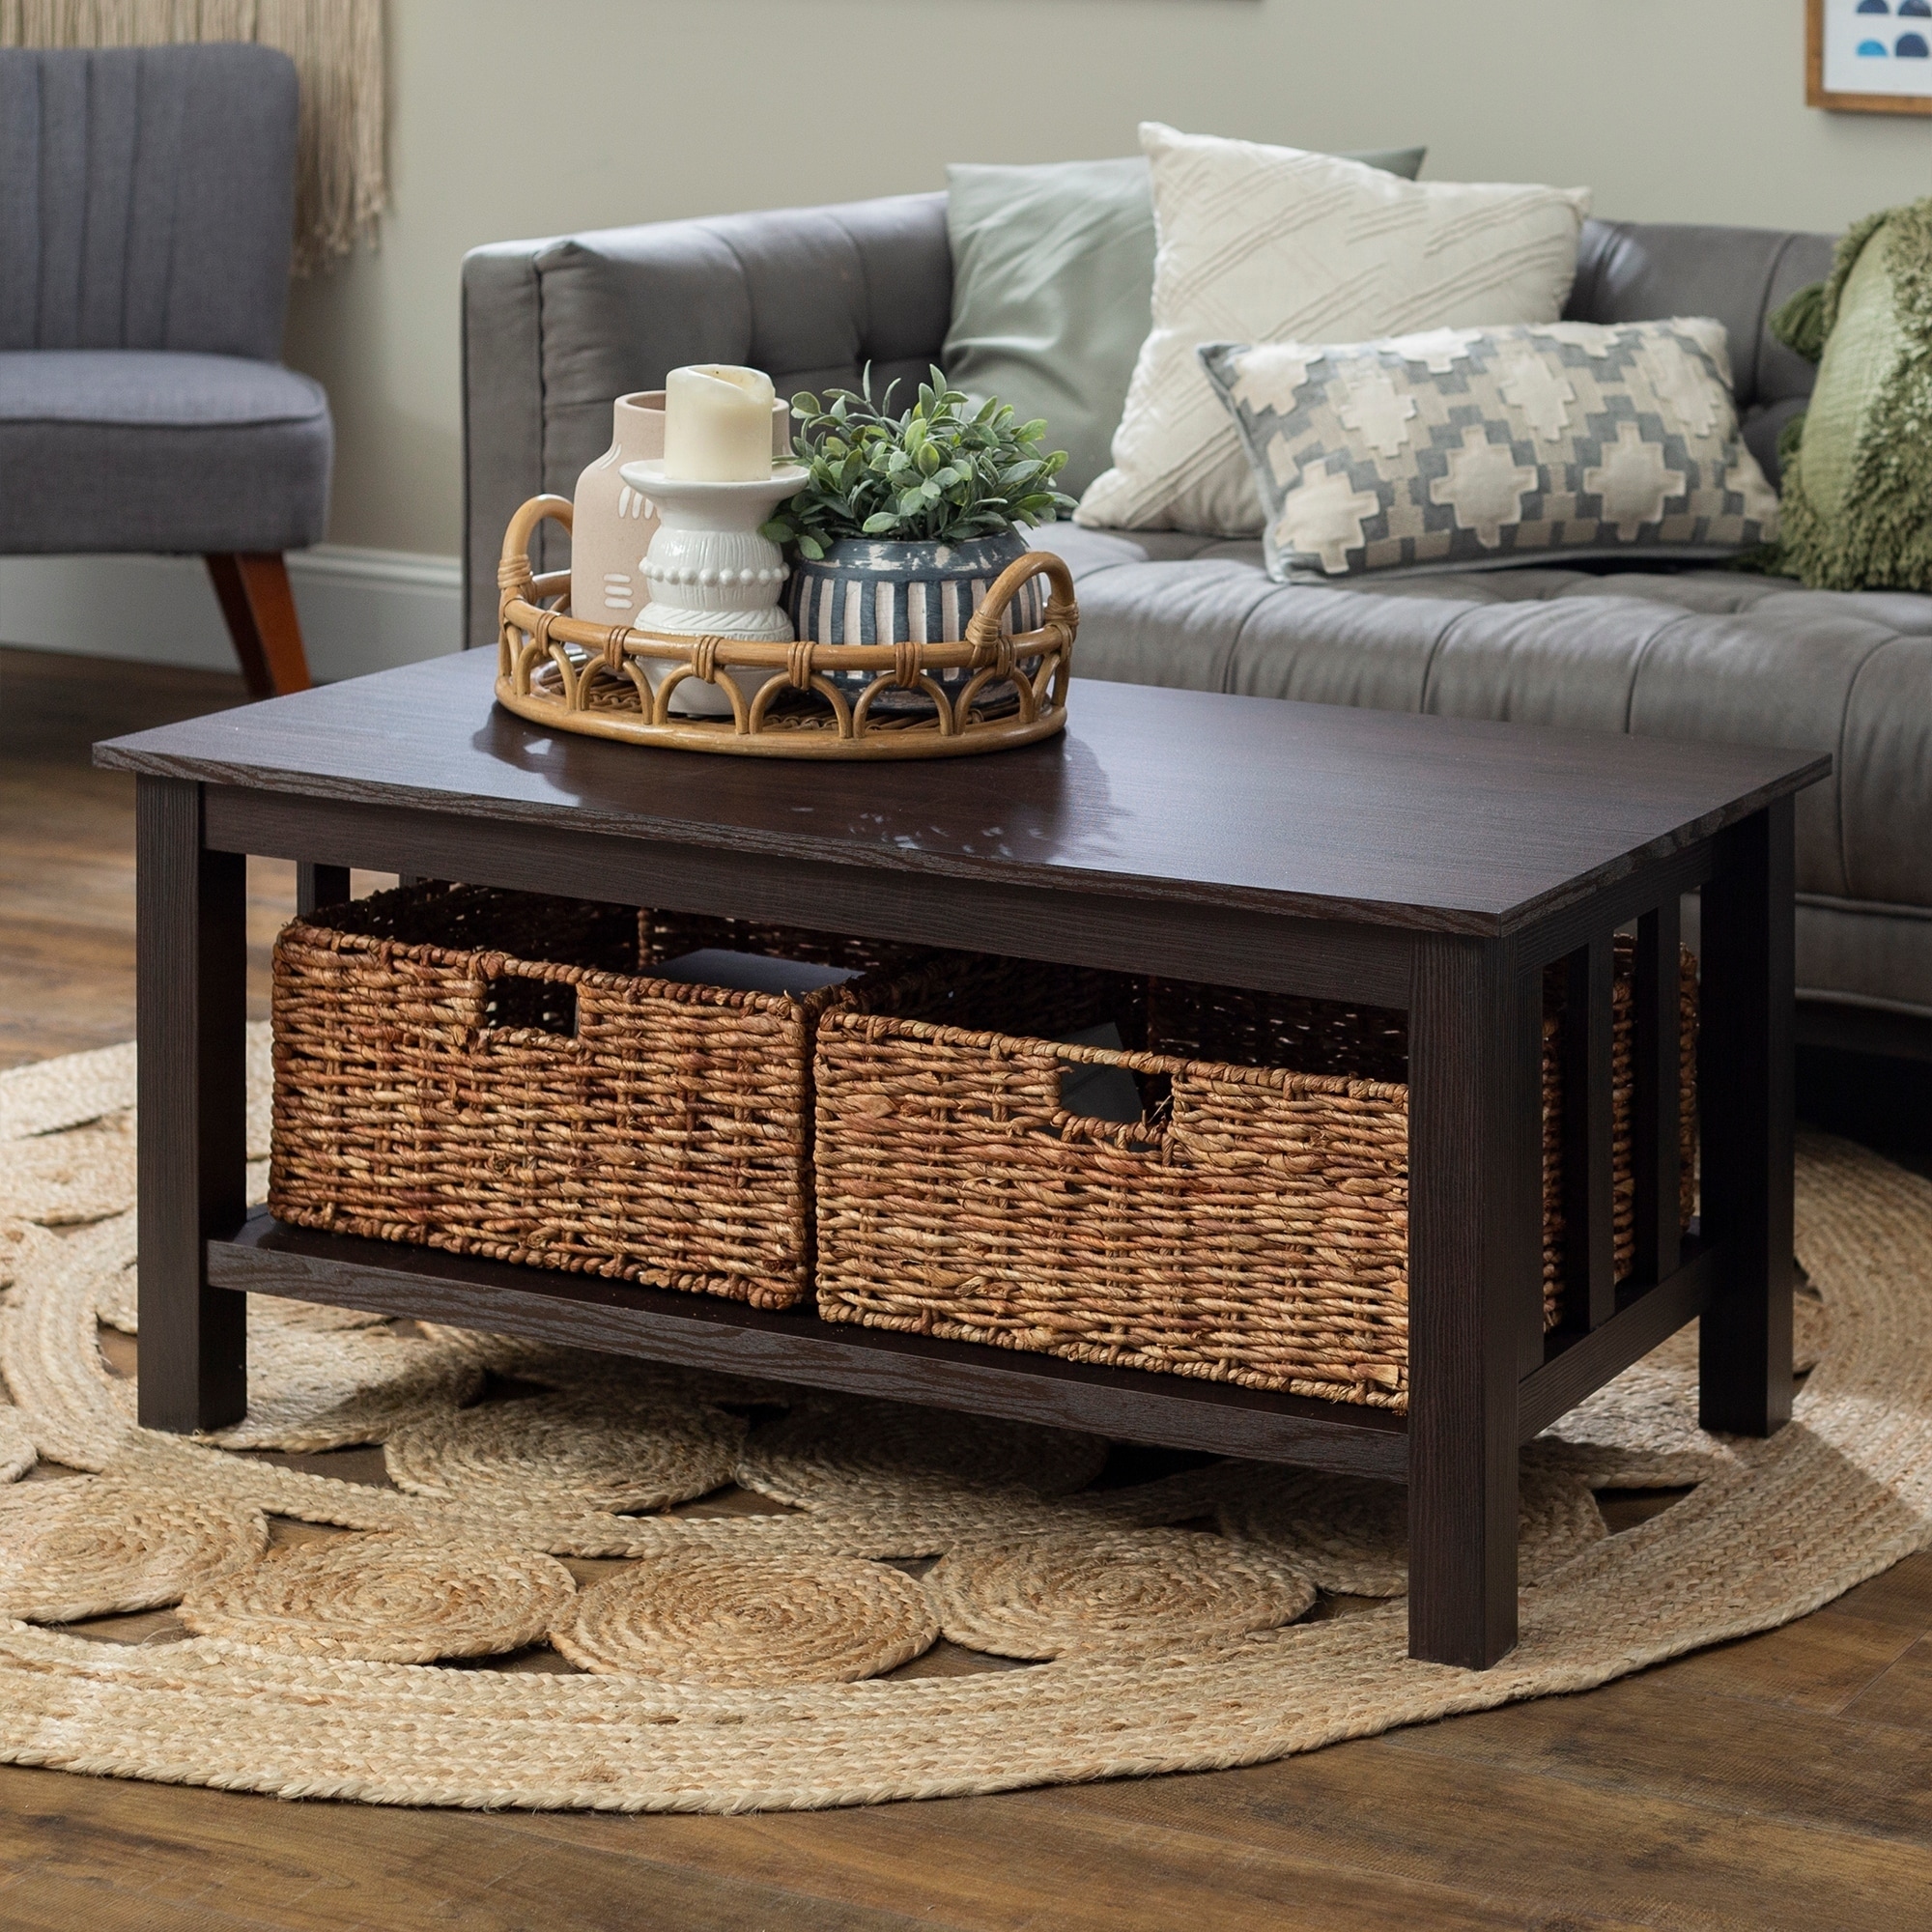 coffee tables with storage